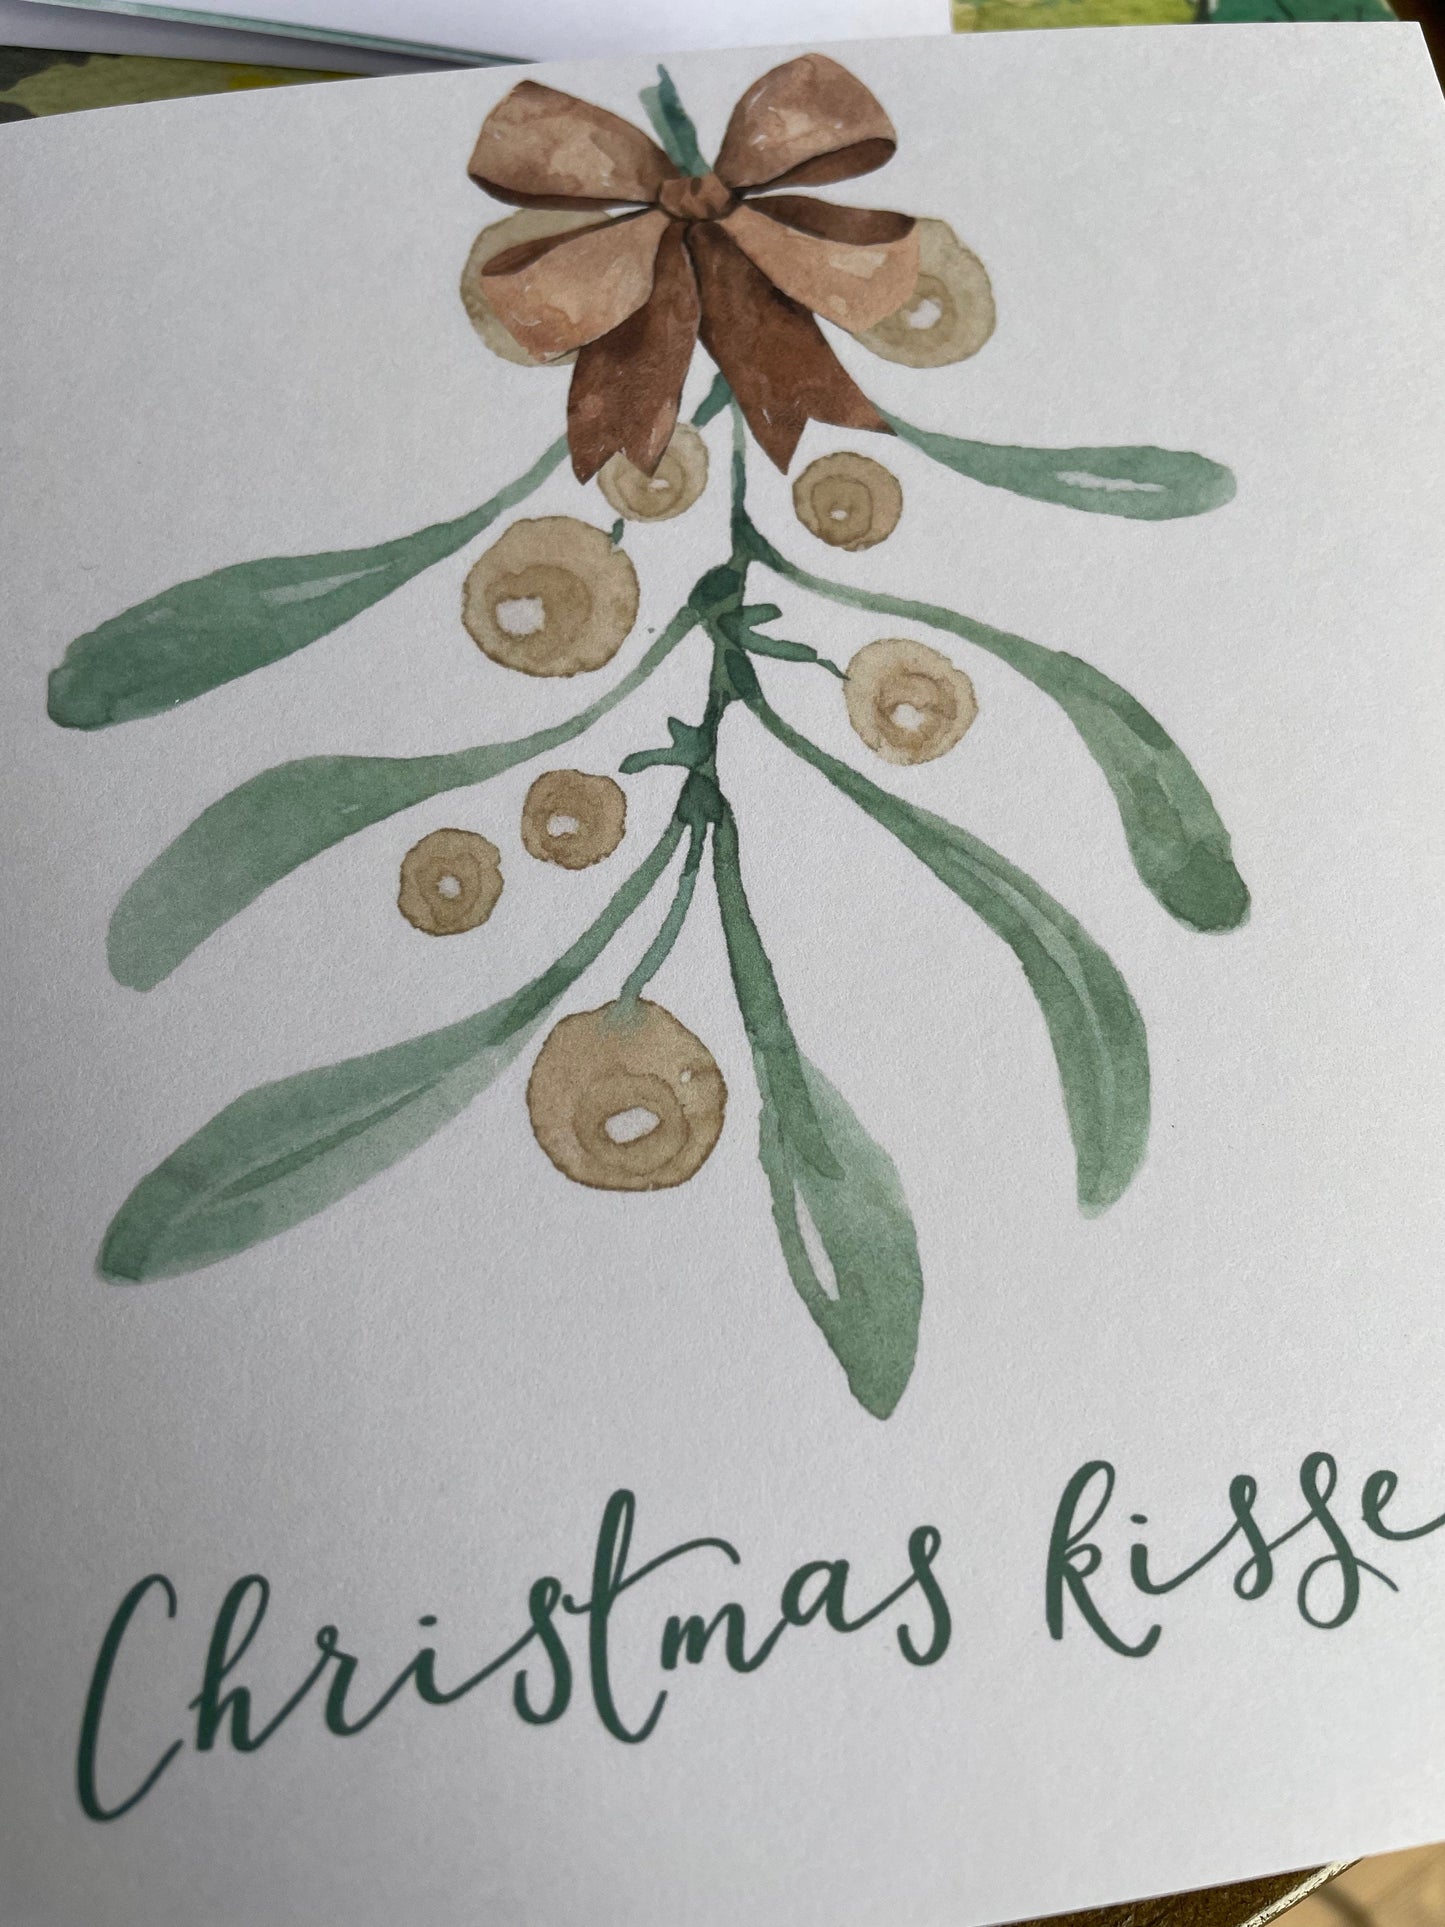 Christmas Kisses card Cards And Hope Designs   